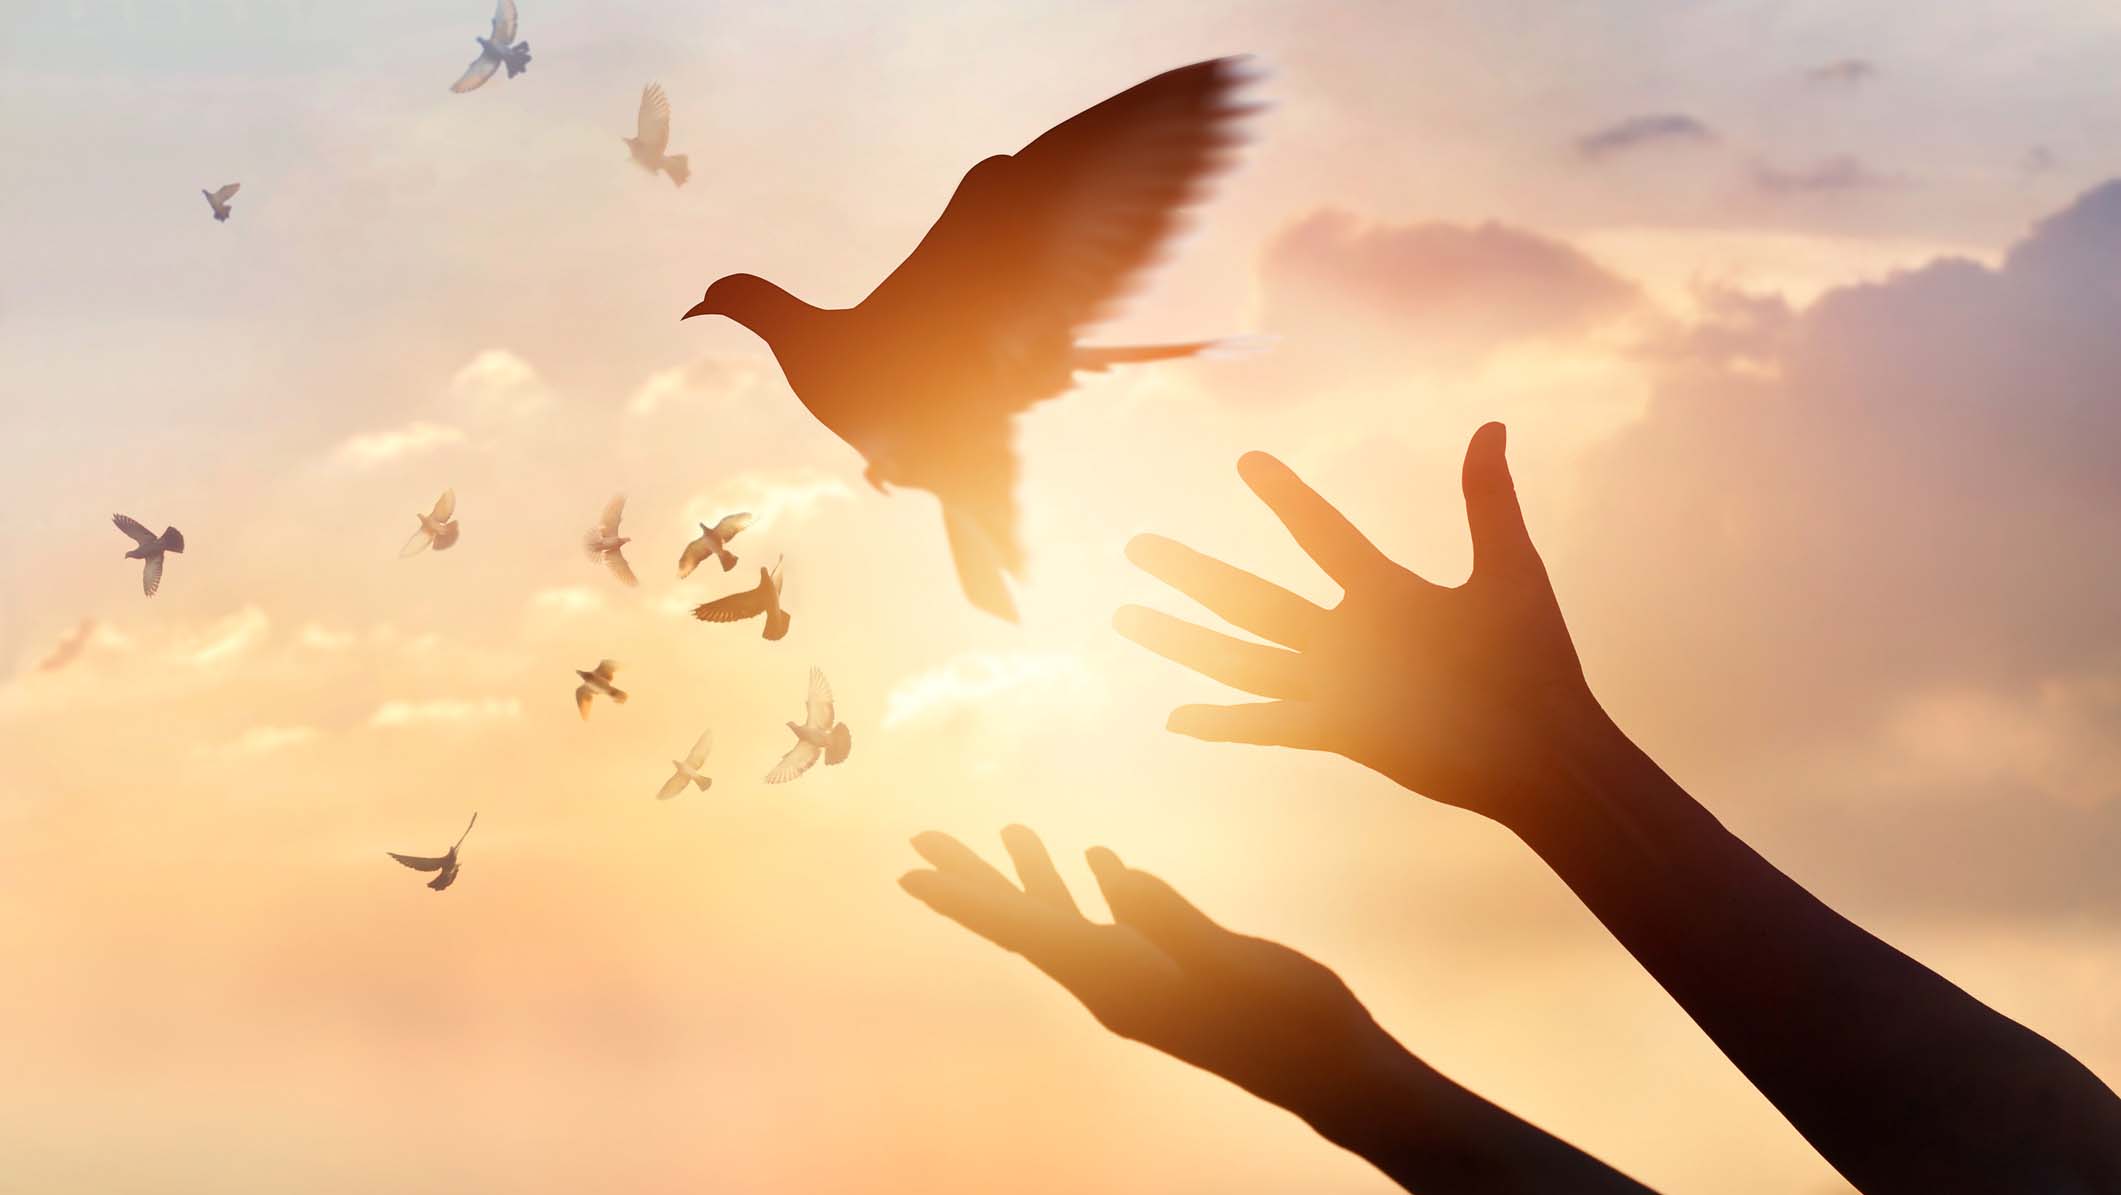 picture of forgiveness - hands releasing a bird